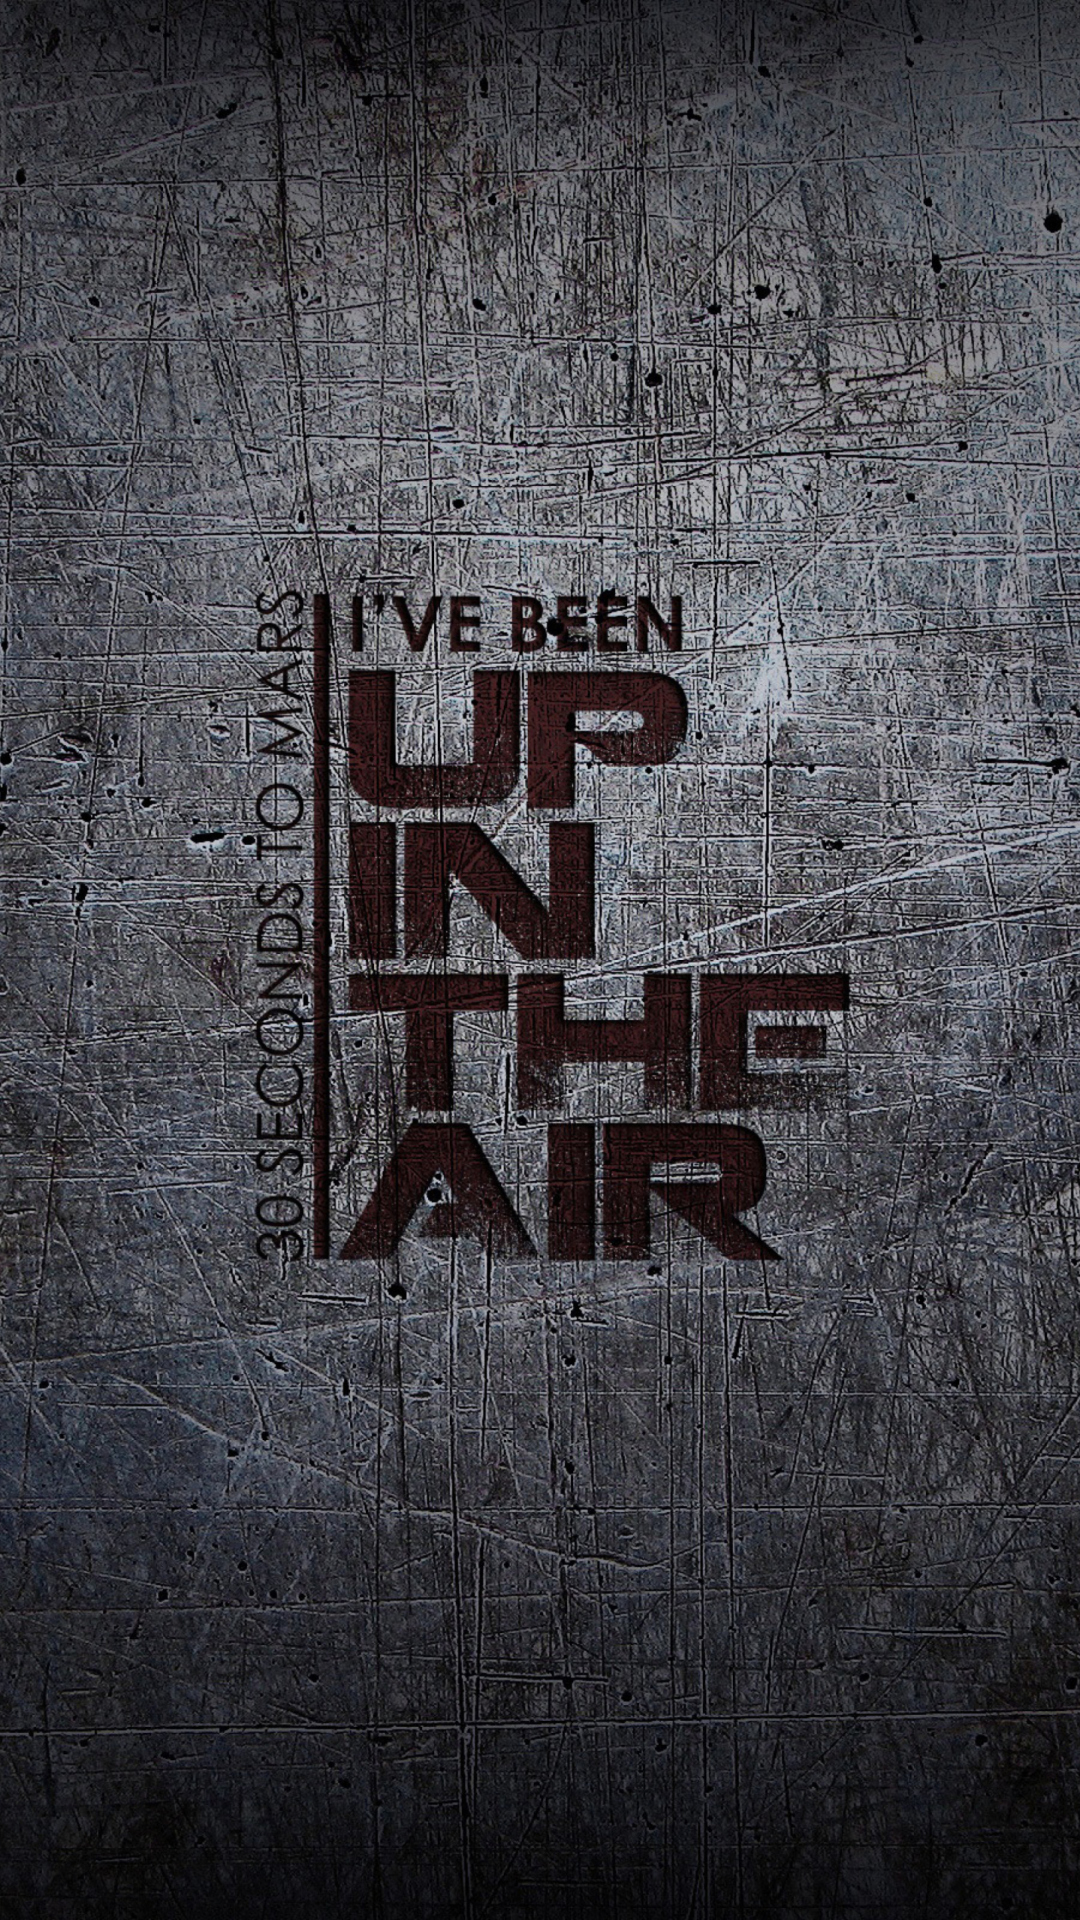 30 Seconds To Mars - Up In The Air wallpaper 1080x1920